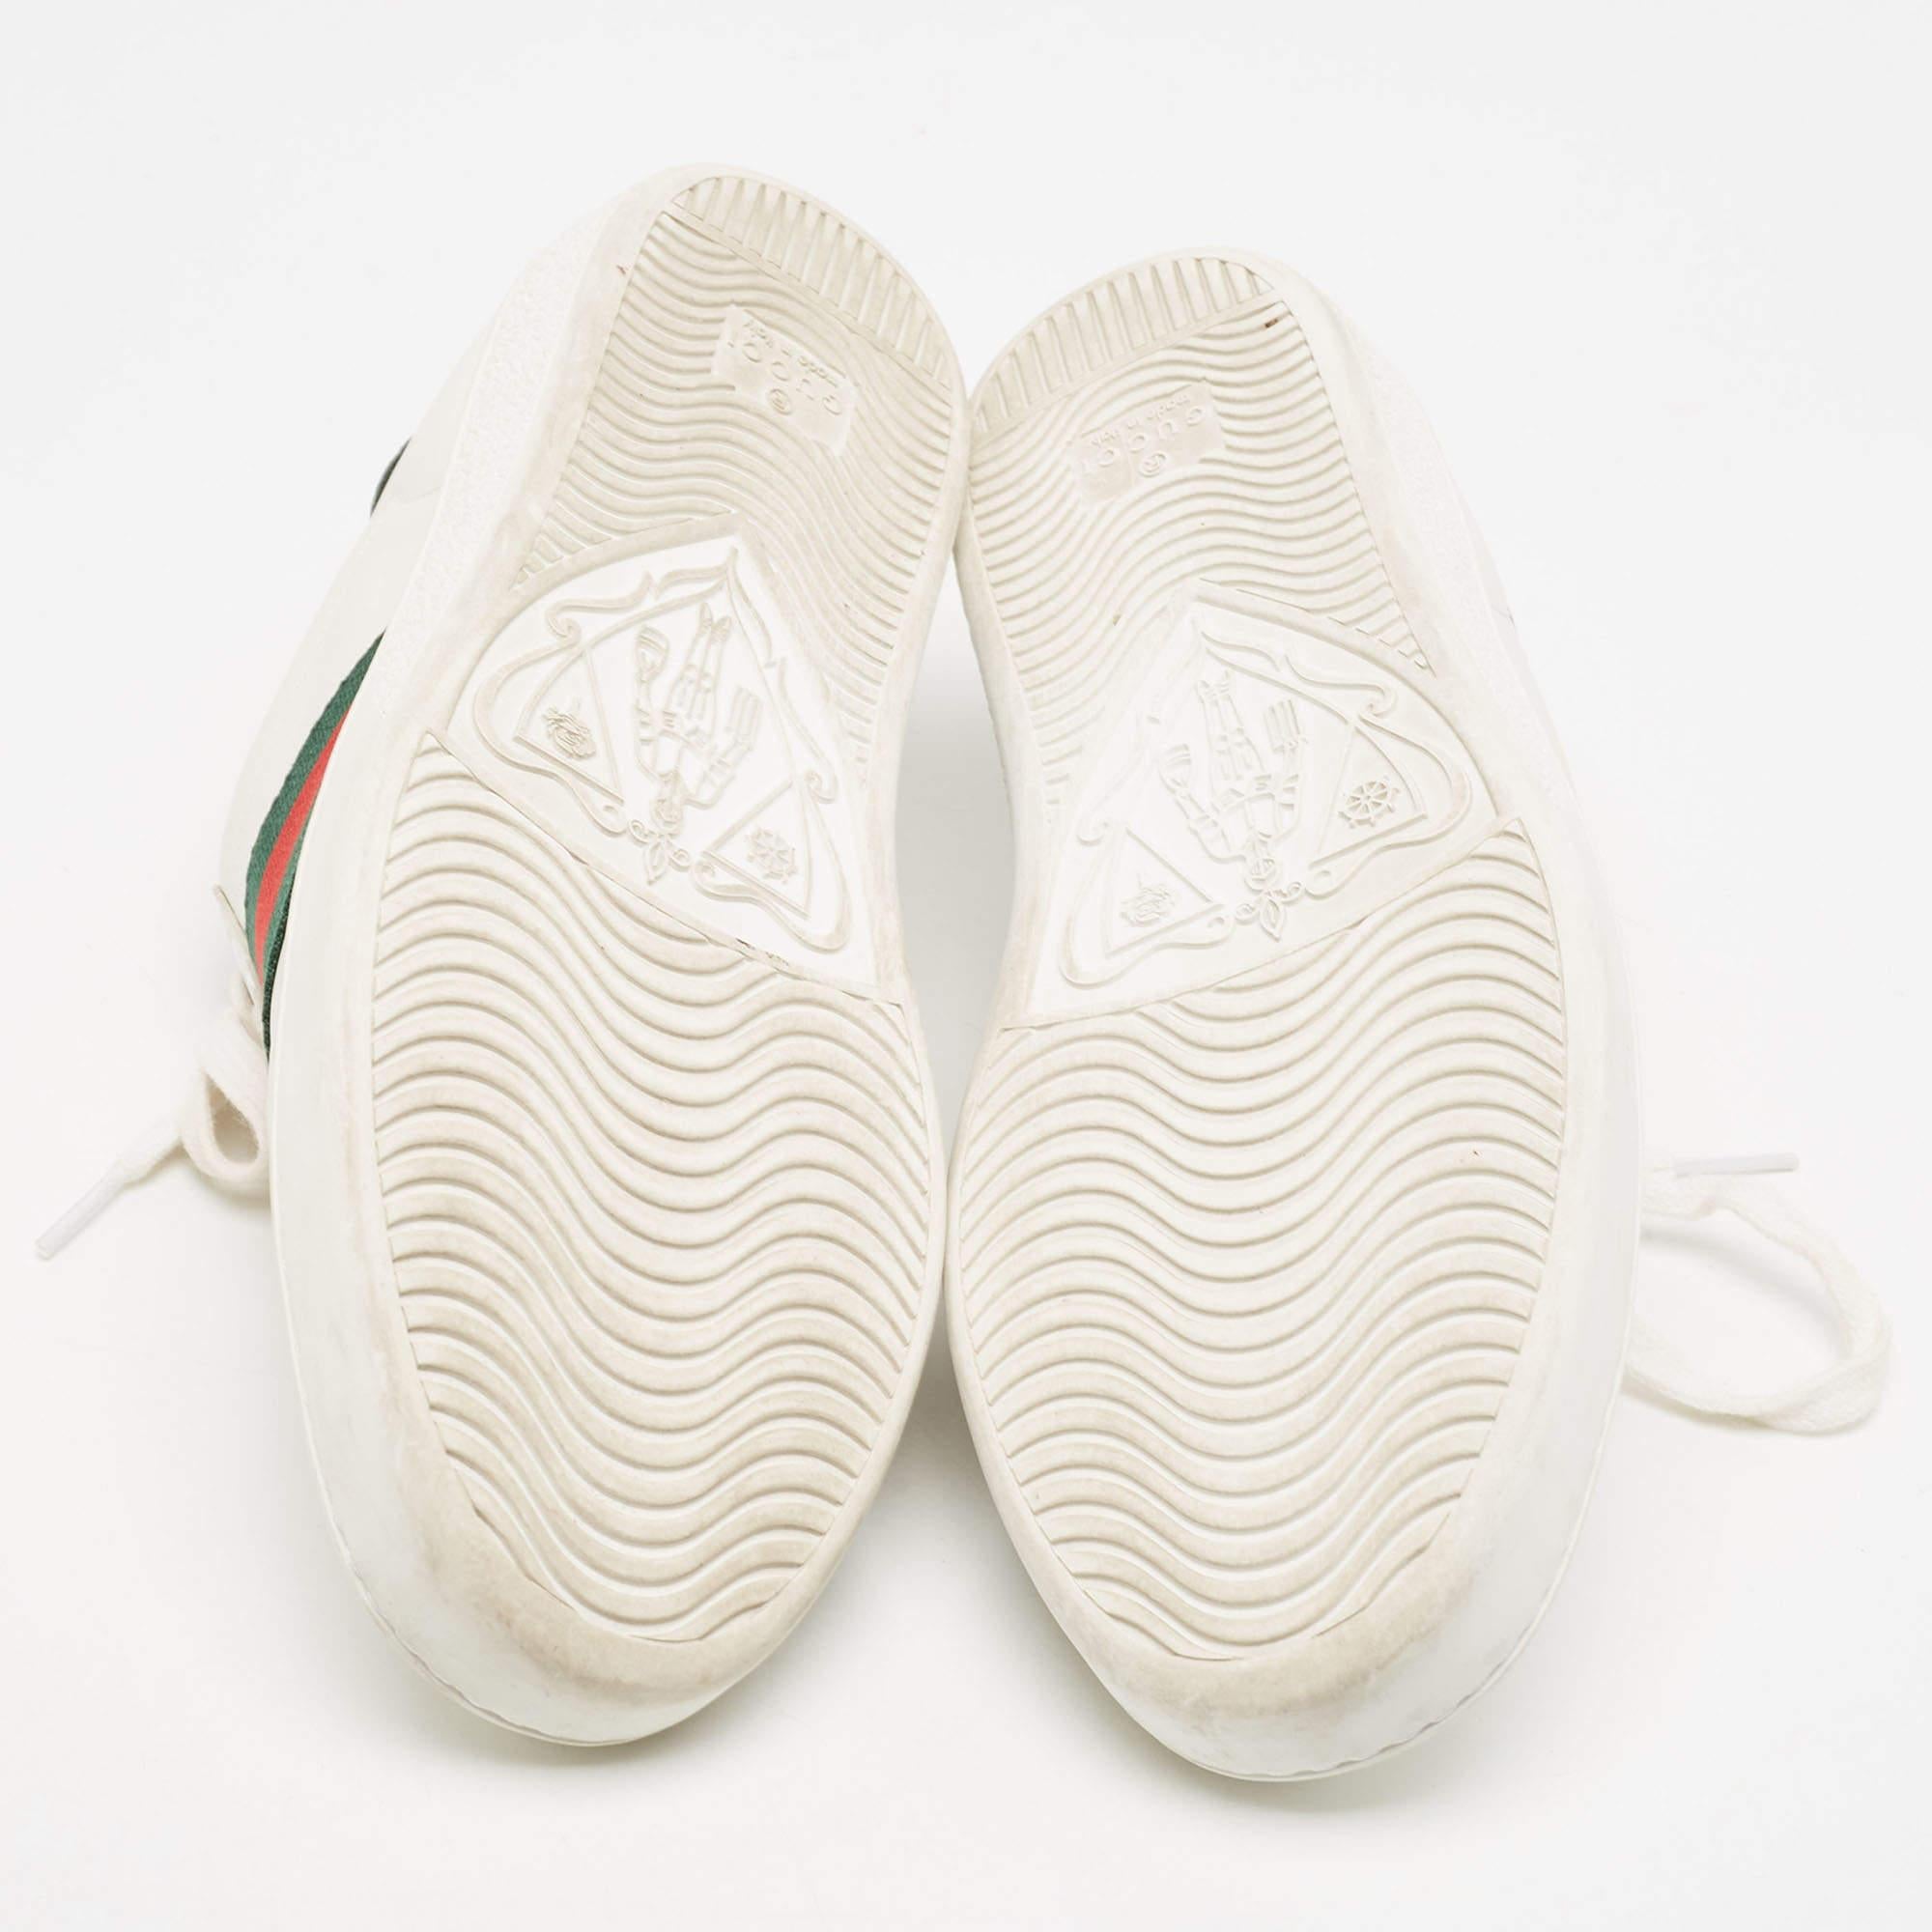 Gucci White/Green Cro Embossed and Leather Ace Sneakers Size 38 In Good Condition For Sale In Dubai, Al Qouz 2